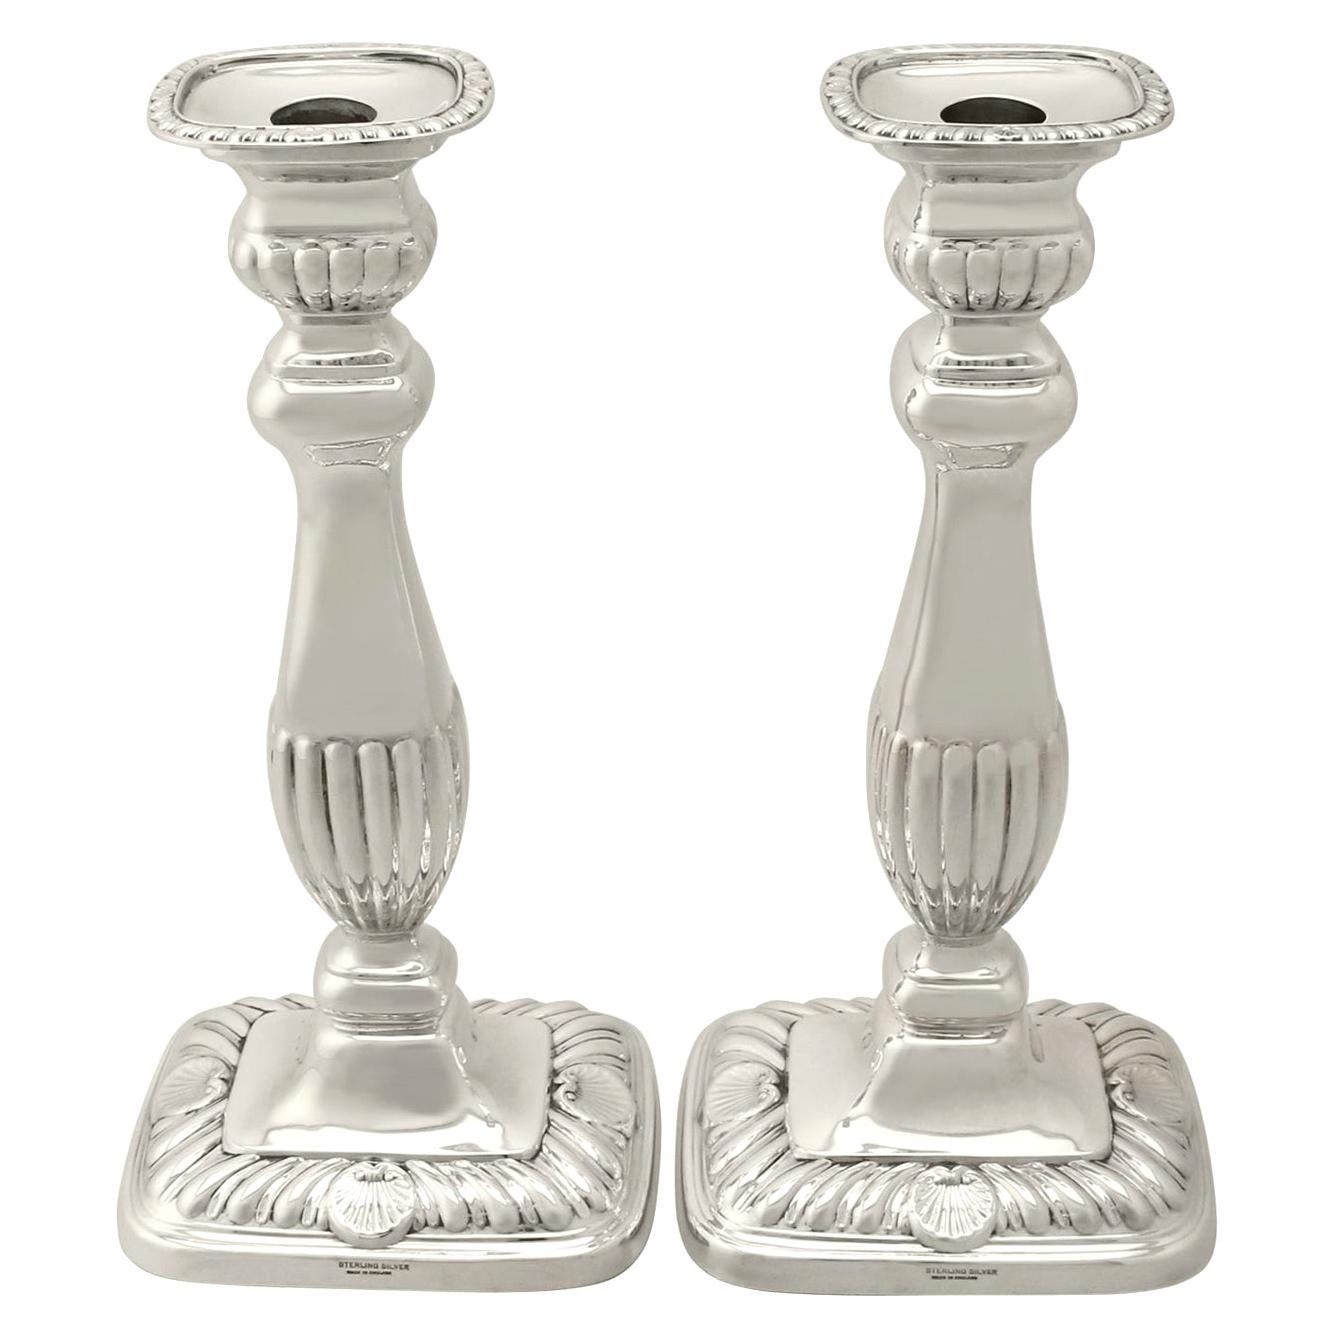 An exceptional, fine and impressive pair of vintage George VI English sterling silver candlesticks made in the Regency style, an addition to our ornamental silverware collection

These exceptional vintage George VI sterling silver candlesticks